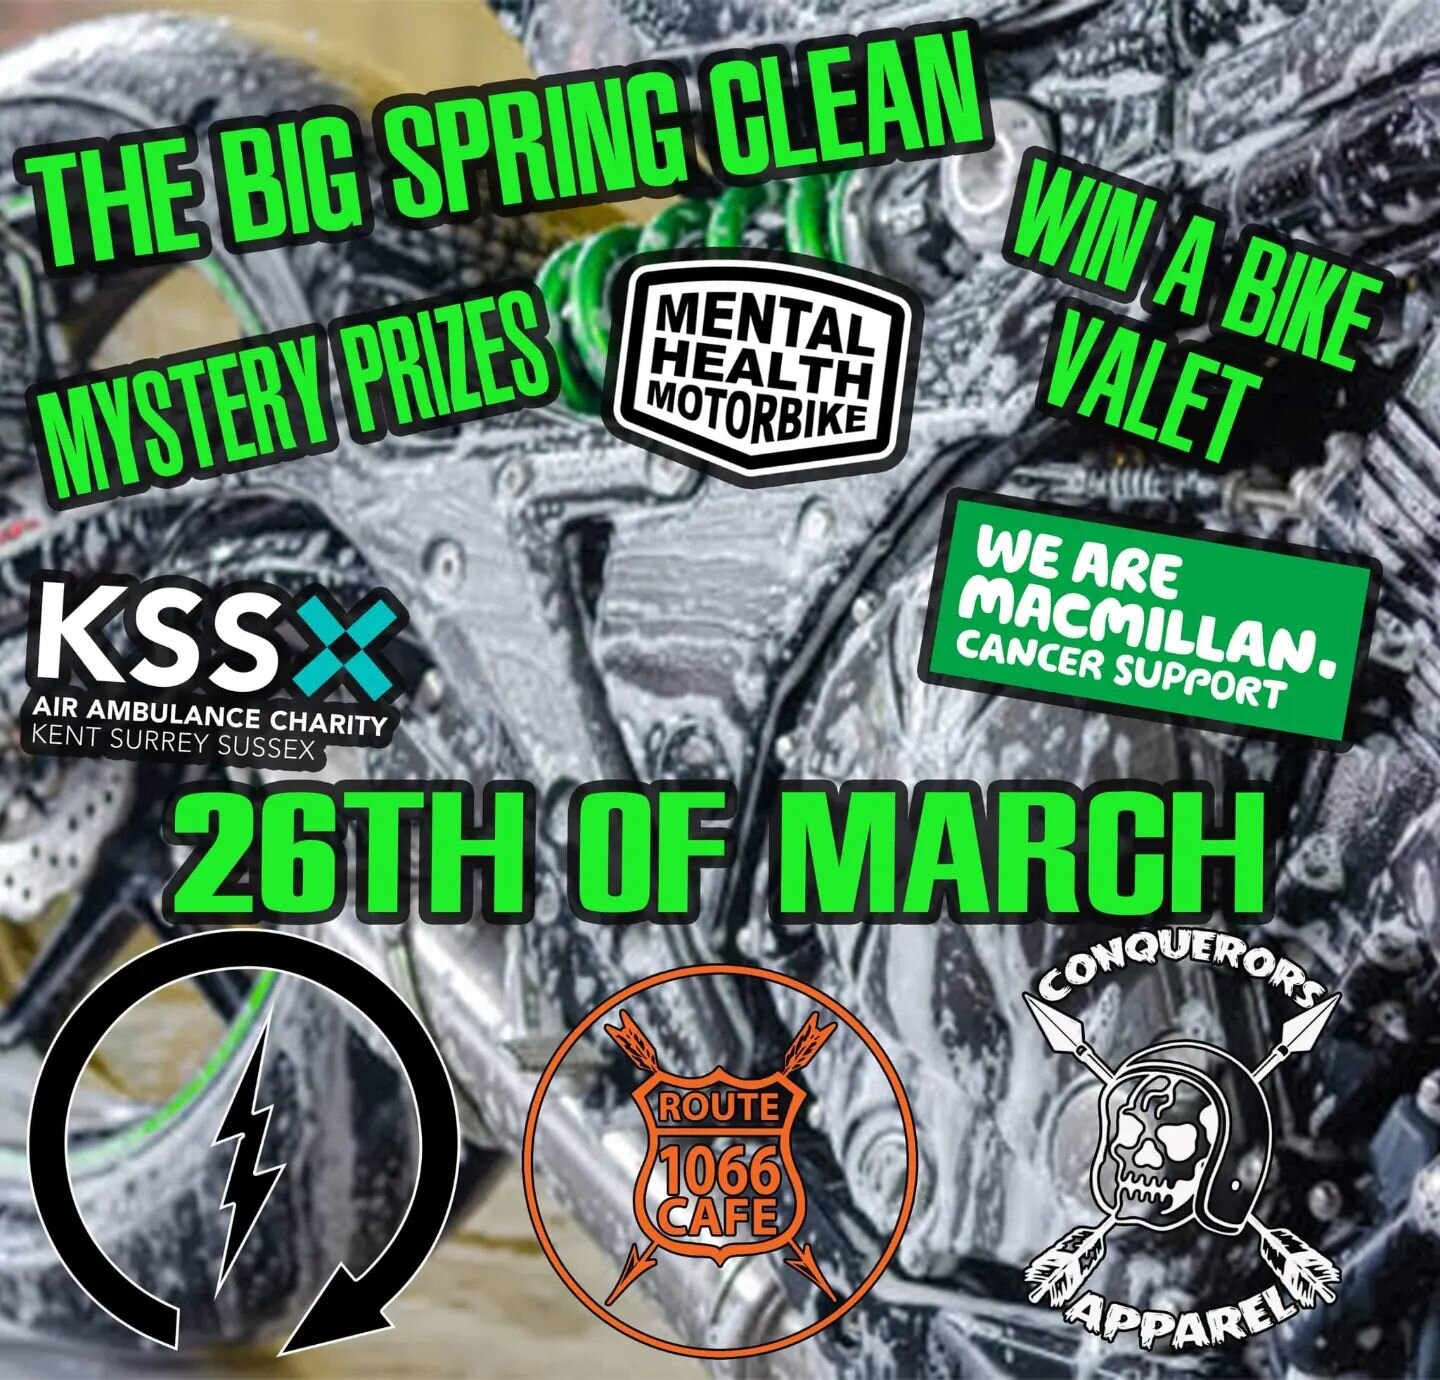 Spring is just around the corner! 

So since we've missed you all so much we've teamed up with the awesome Biker Nexus app to spoil you with the chance of winning a FREE full motorcycle valet, carried out by the fantastic Jamie at Fosters Moto Valeti